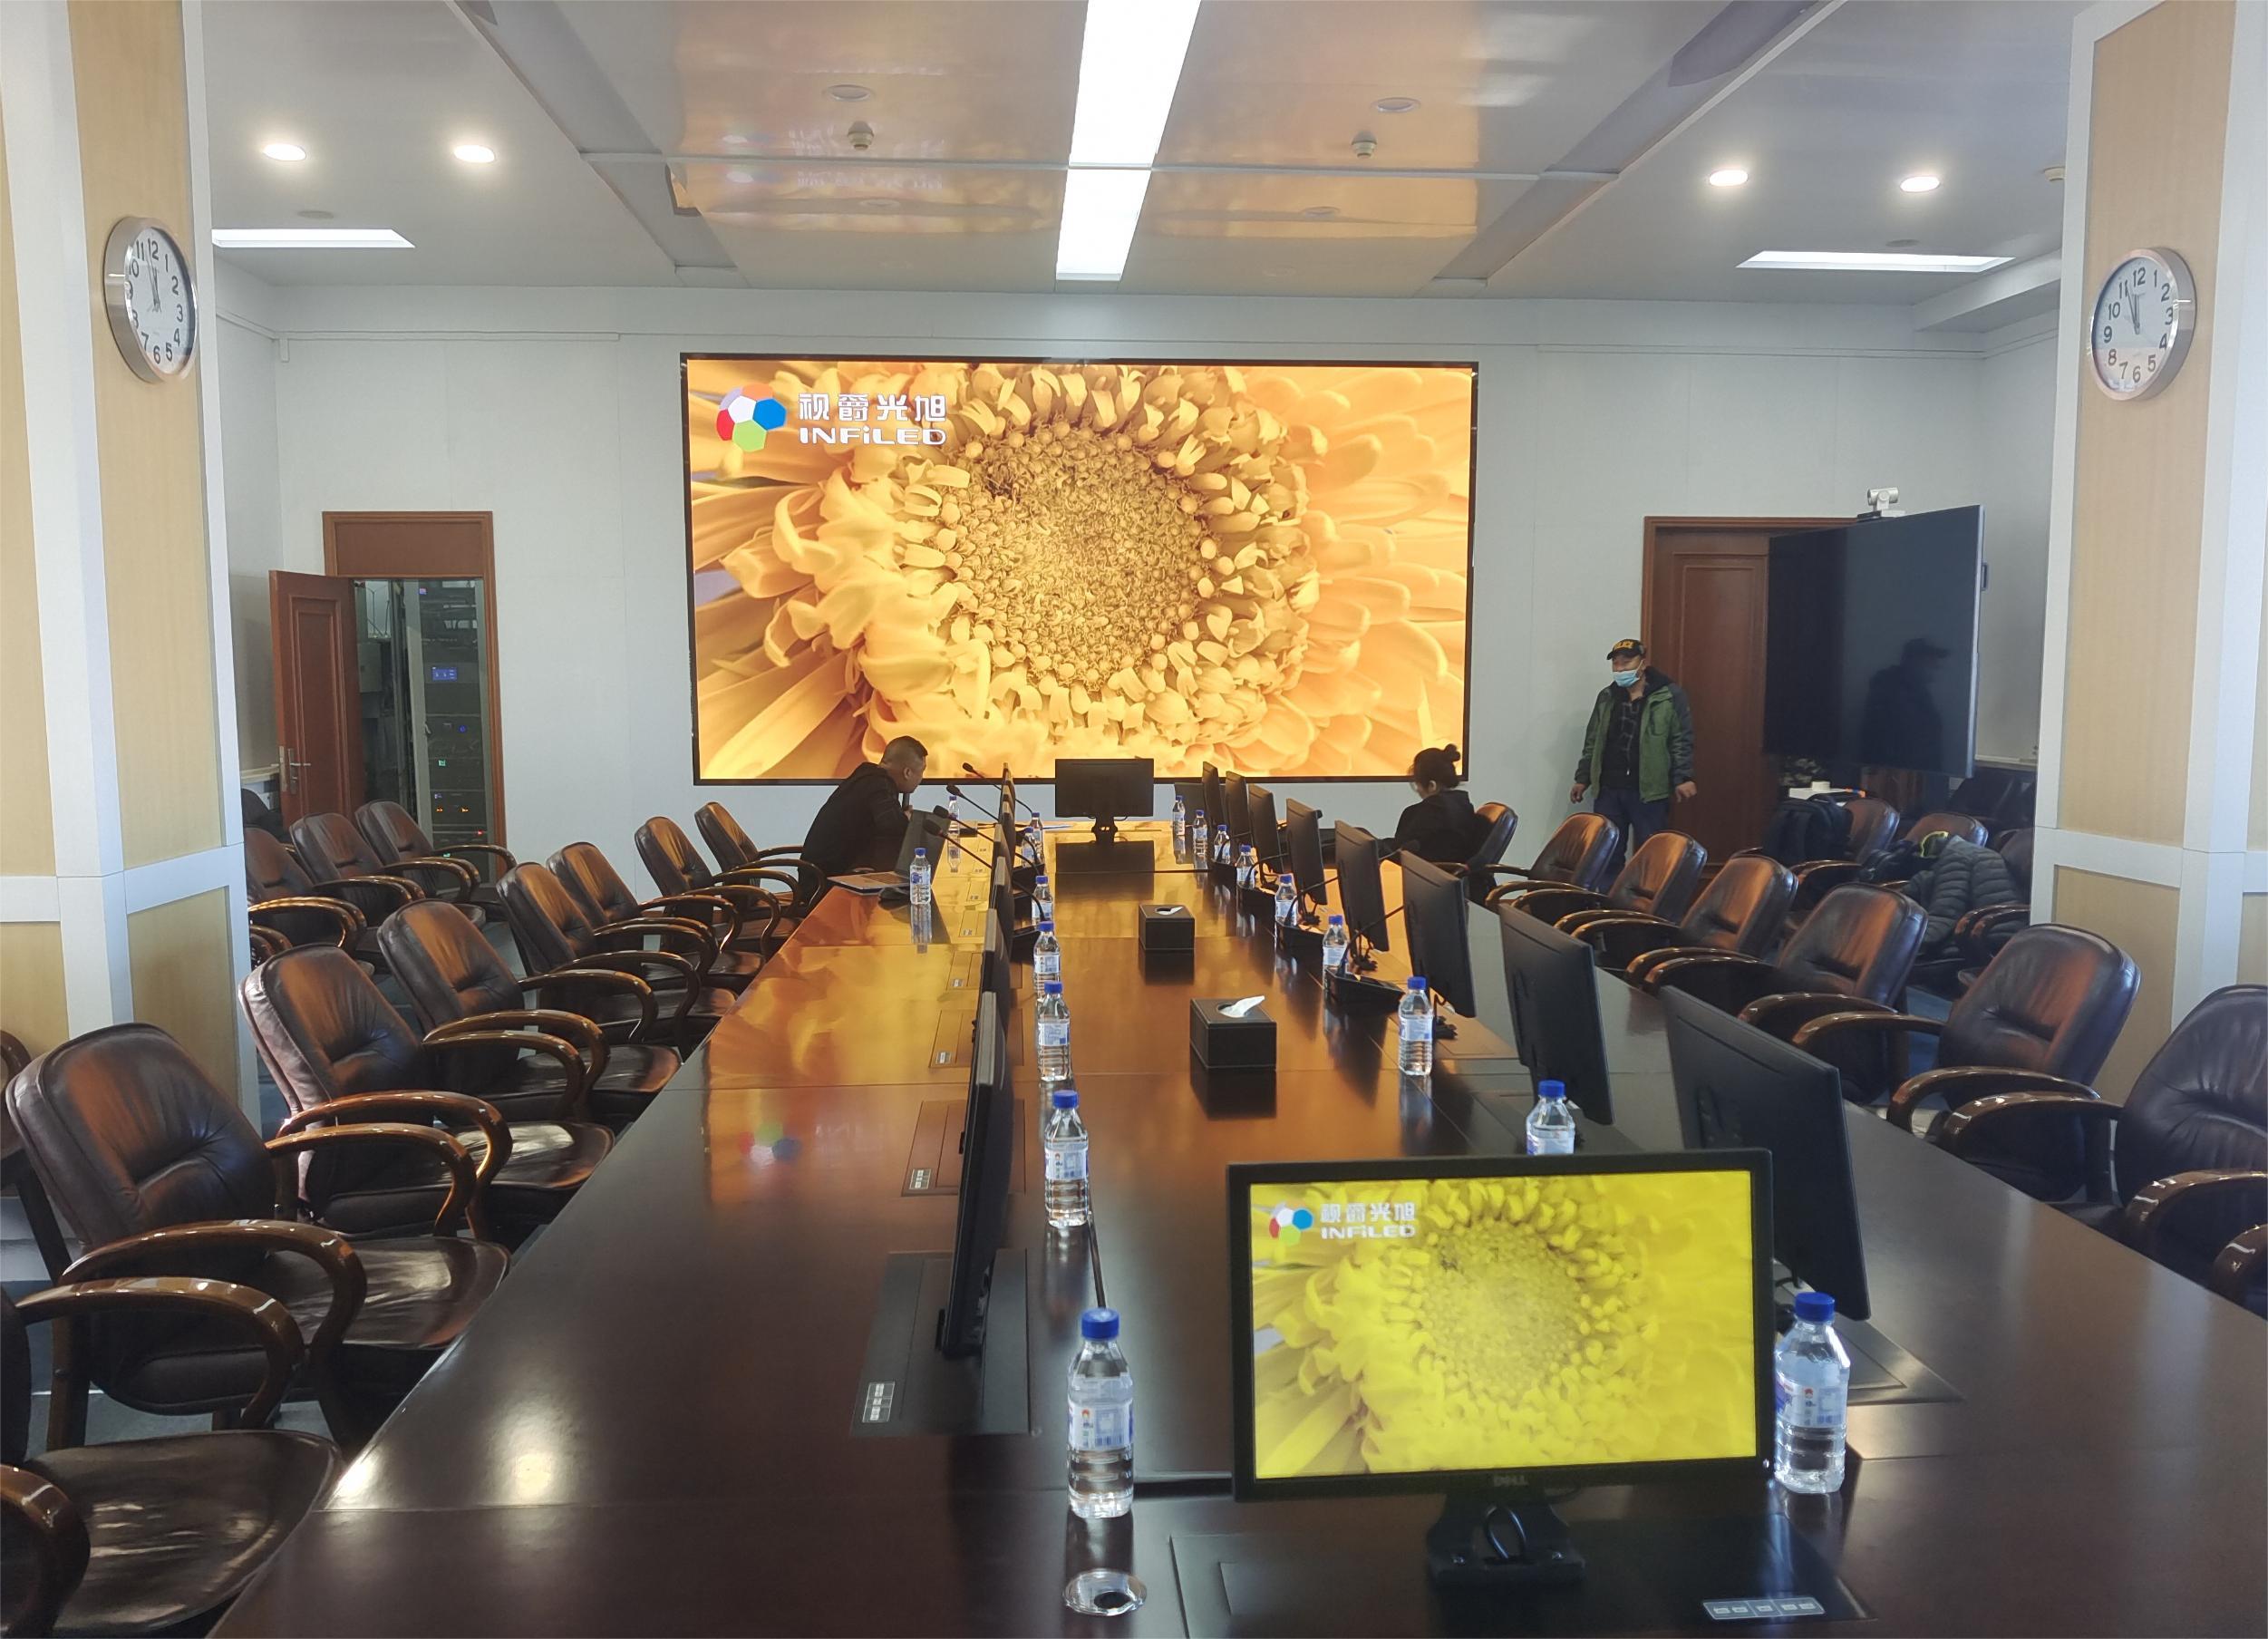 An INFiLED-made practical LED display solution for CRRC Changchun’s conference room